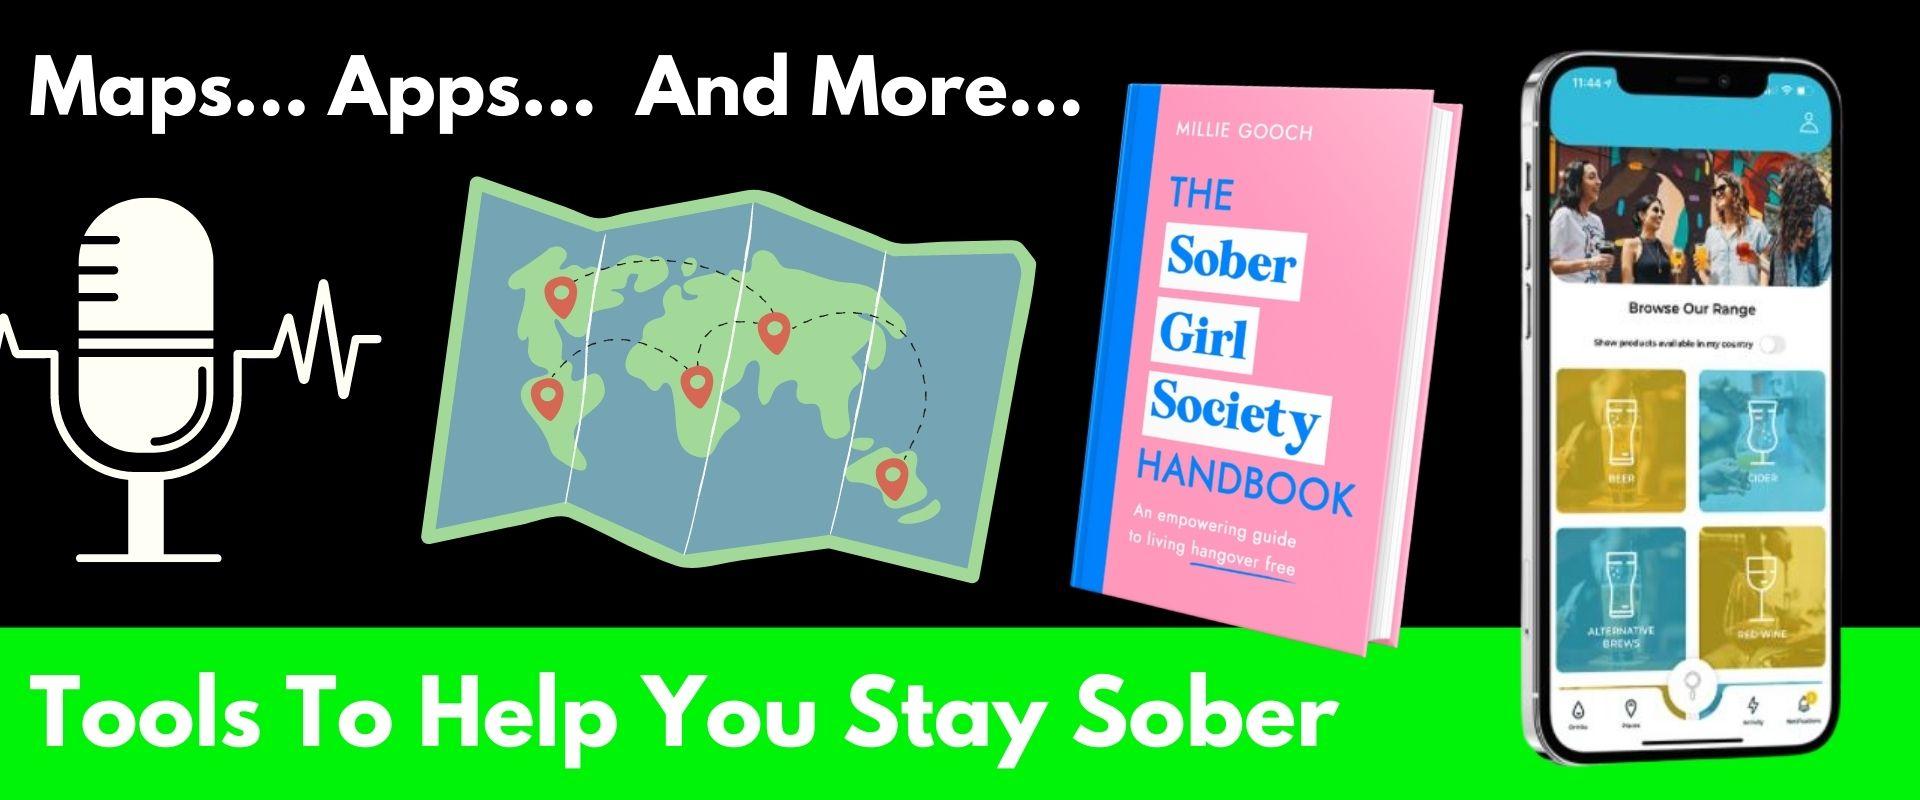 Tools to Help You Stay Sober - Maps Apps and More